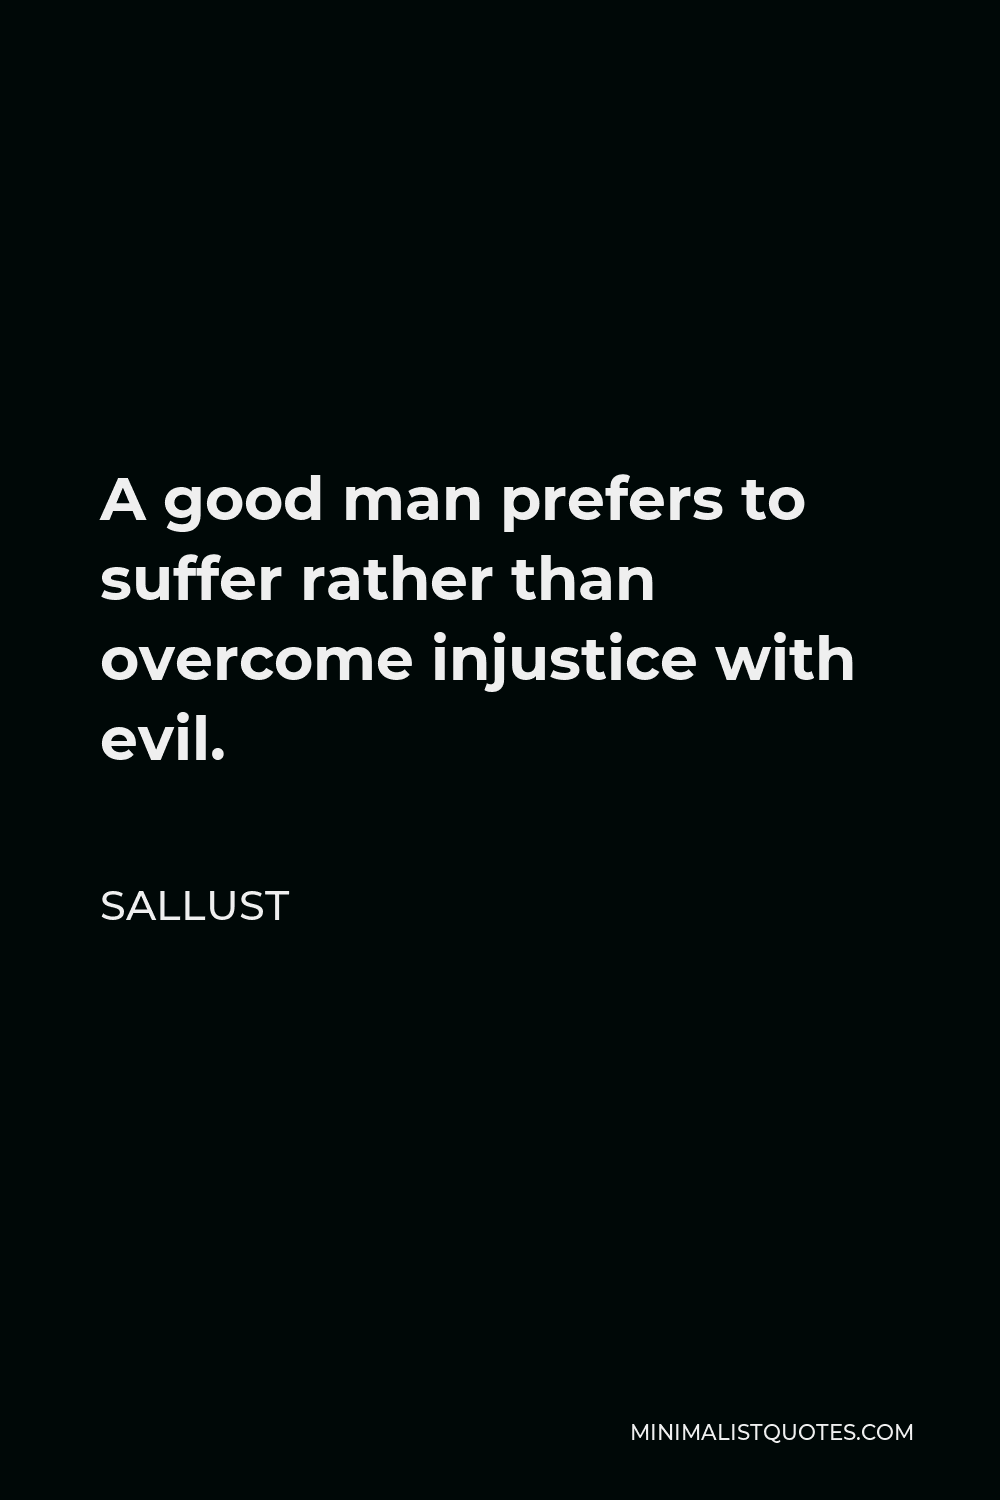 Sallust Quote - A good man prefers to suffer rather than overcome injustice with evil.